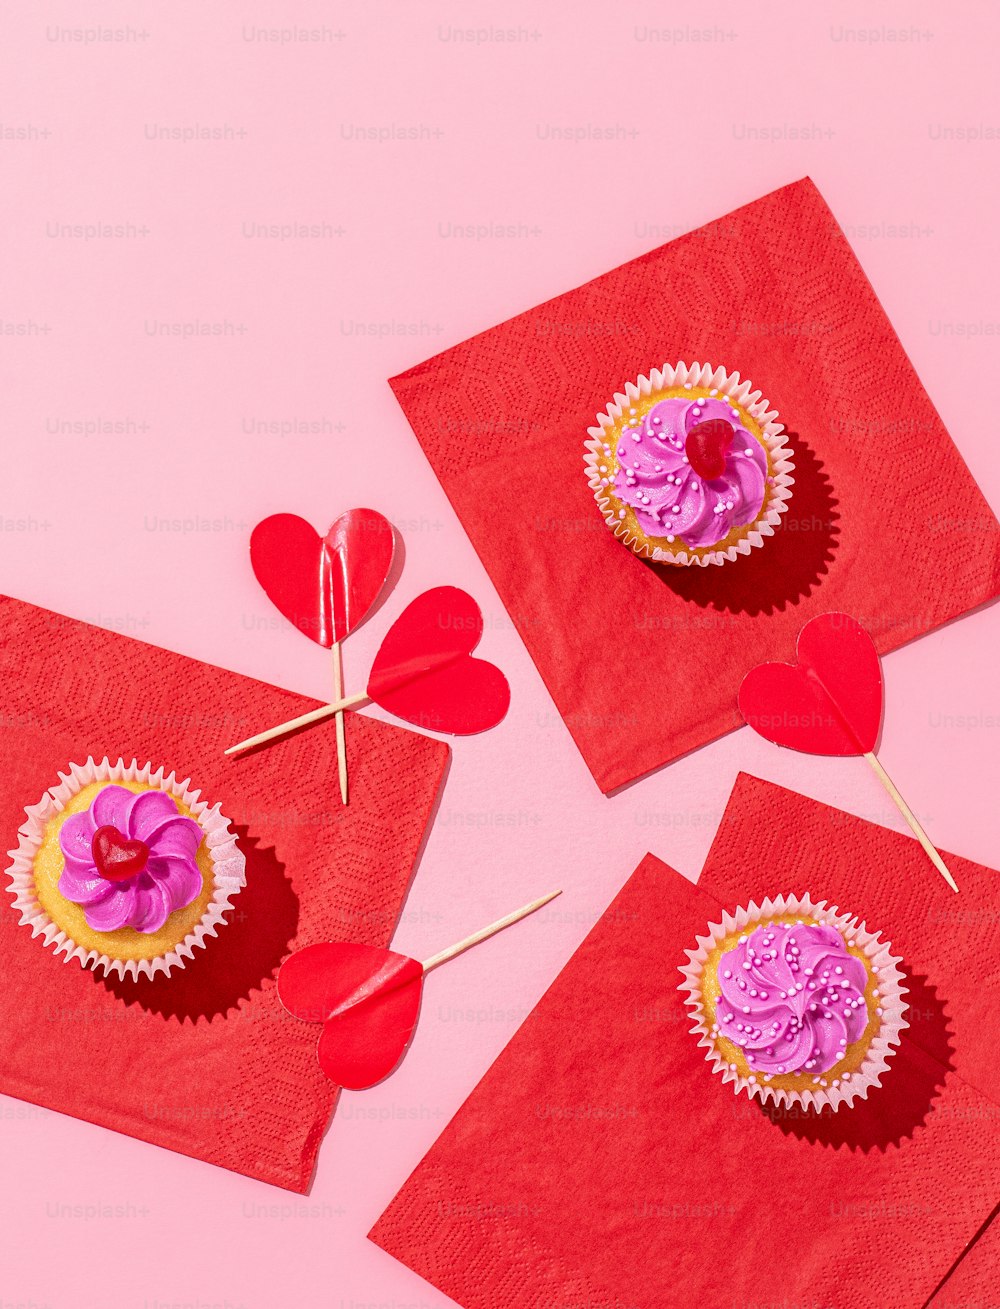 three red napkins with cupcakes on them